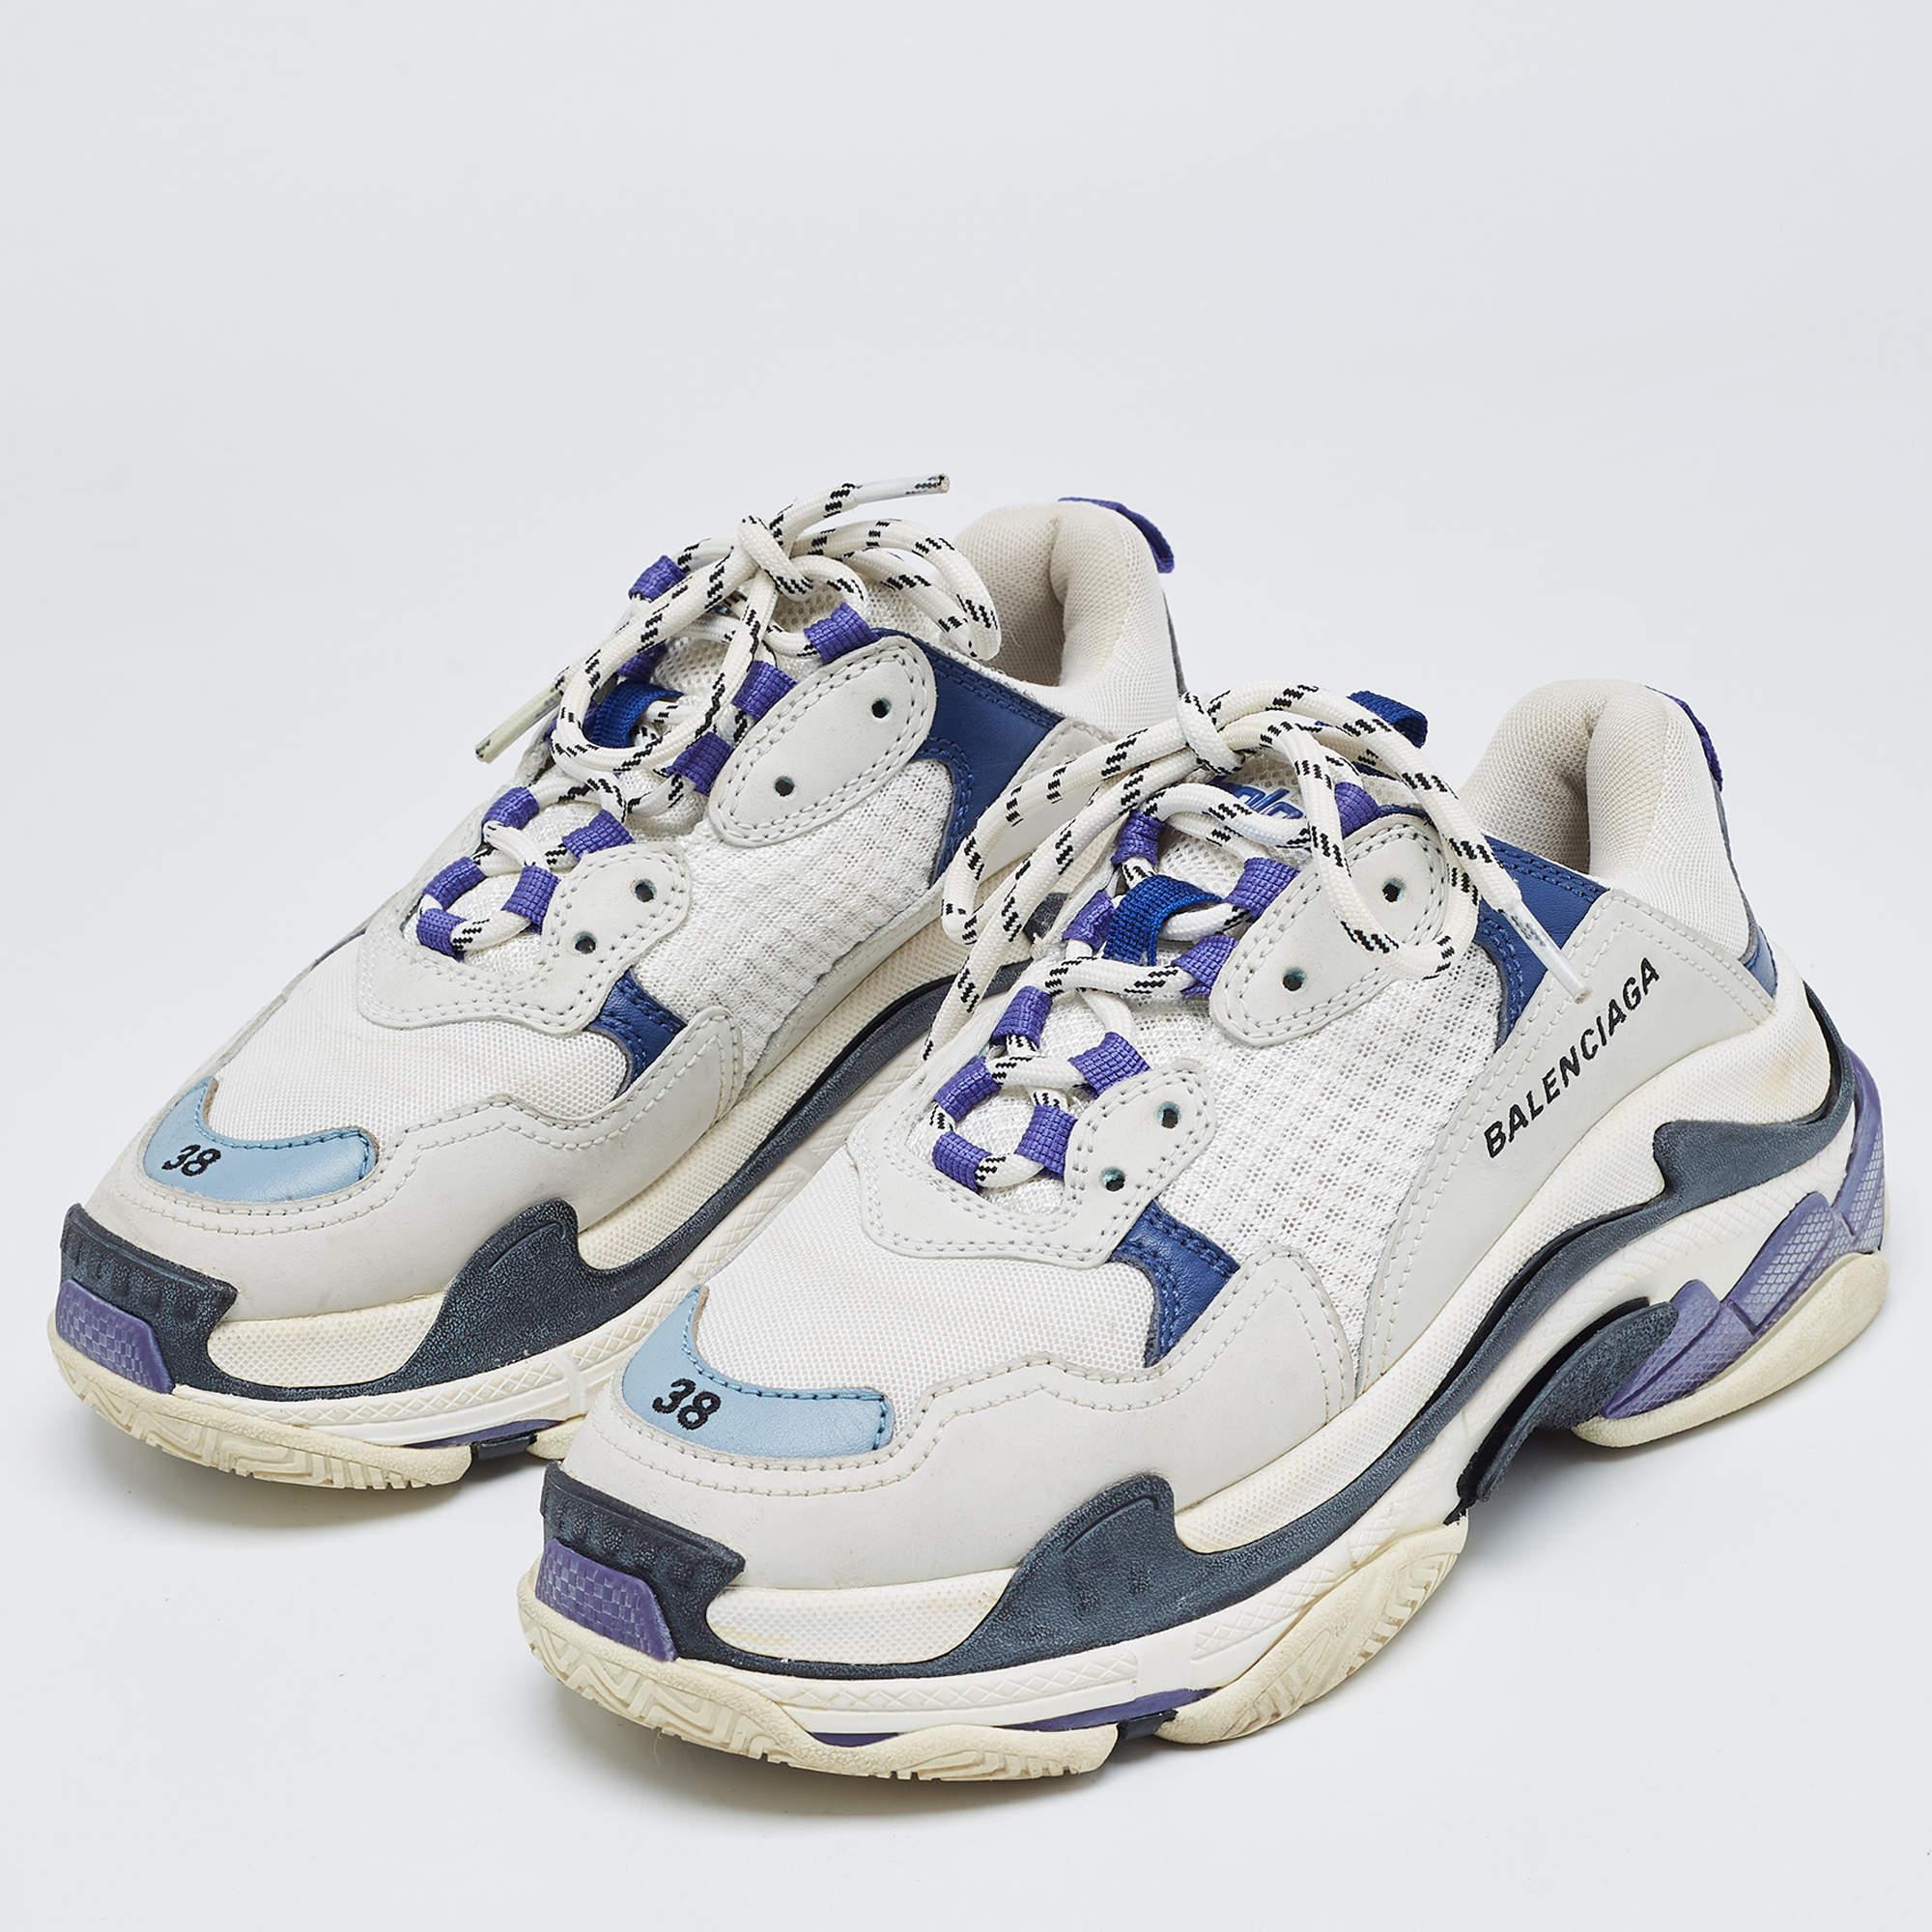 Balenciaga White/Blue Nubuck Leather and Mesh Triple S Sneakers Size 38 For Sale 1